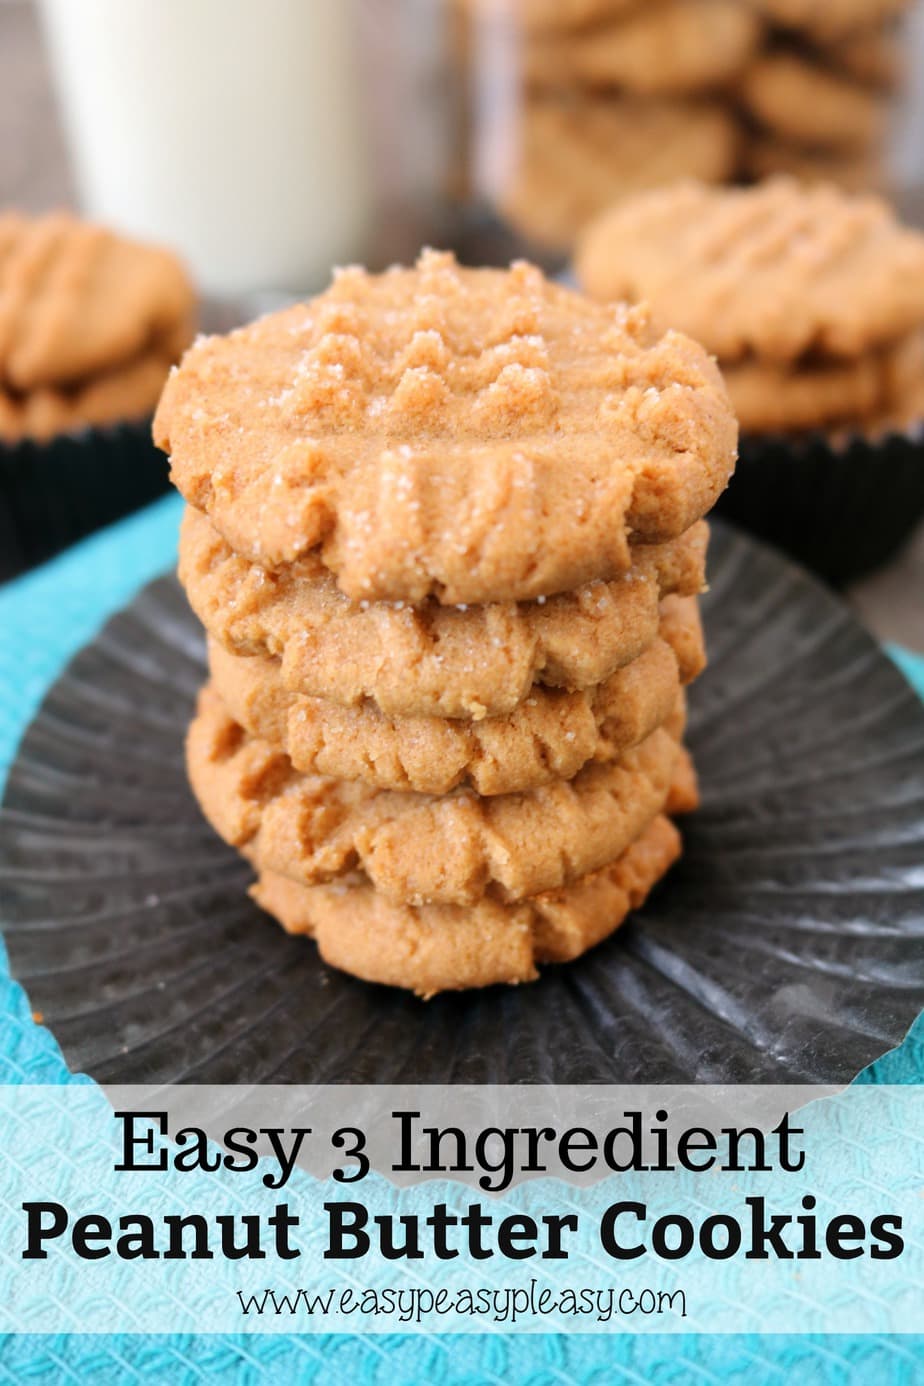 Satisfy your sweet tooth craving in a flash with these 3 ingredient Peanut Butter Cookies.